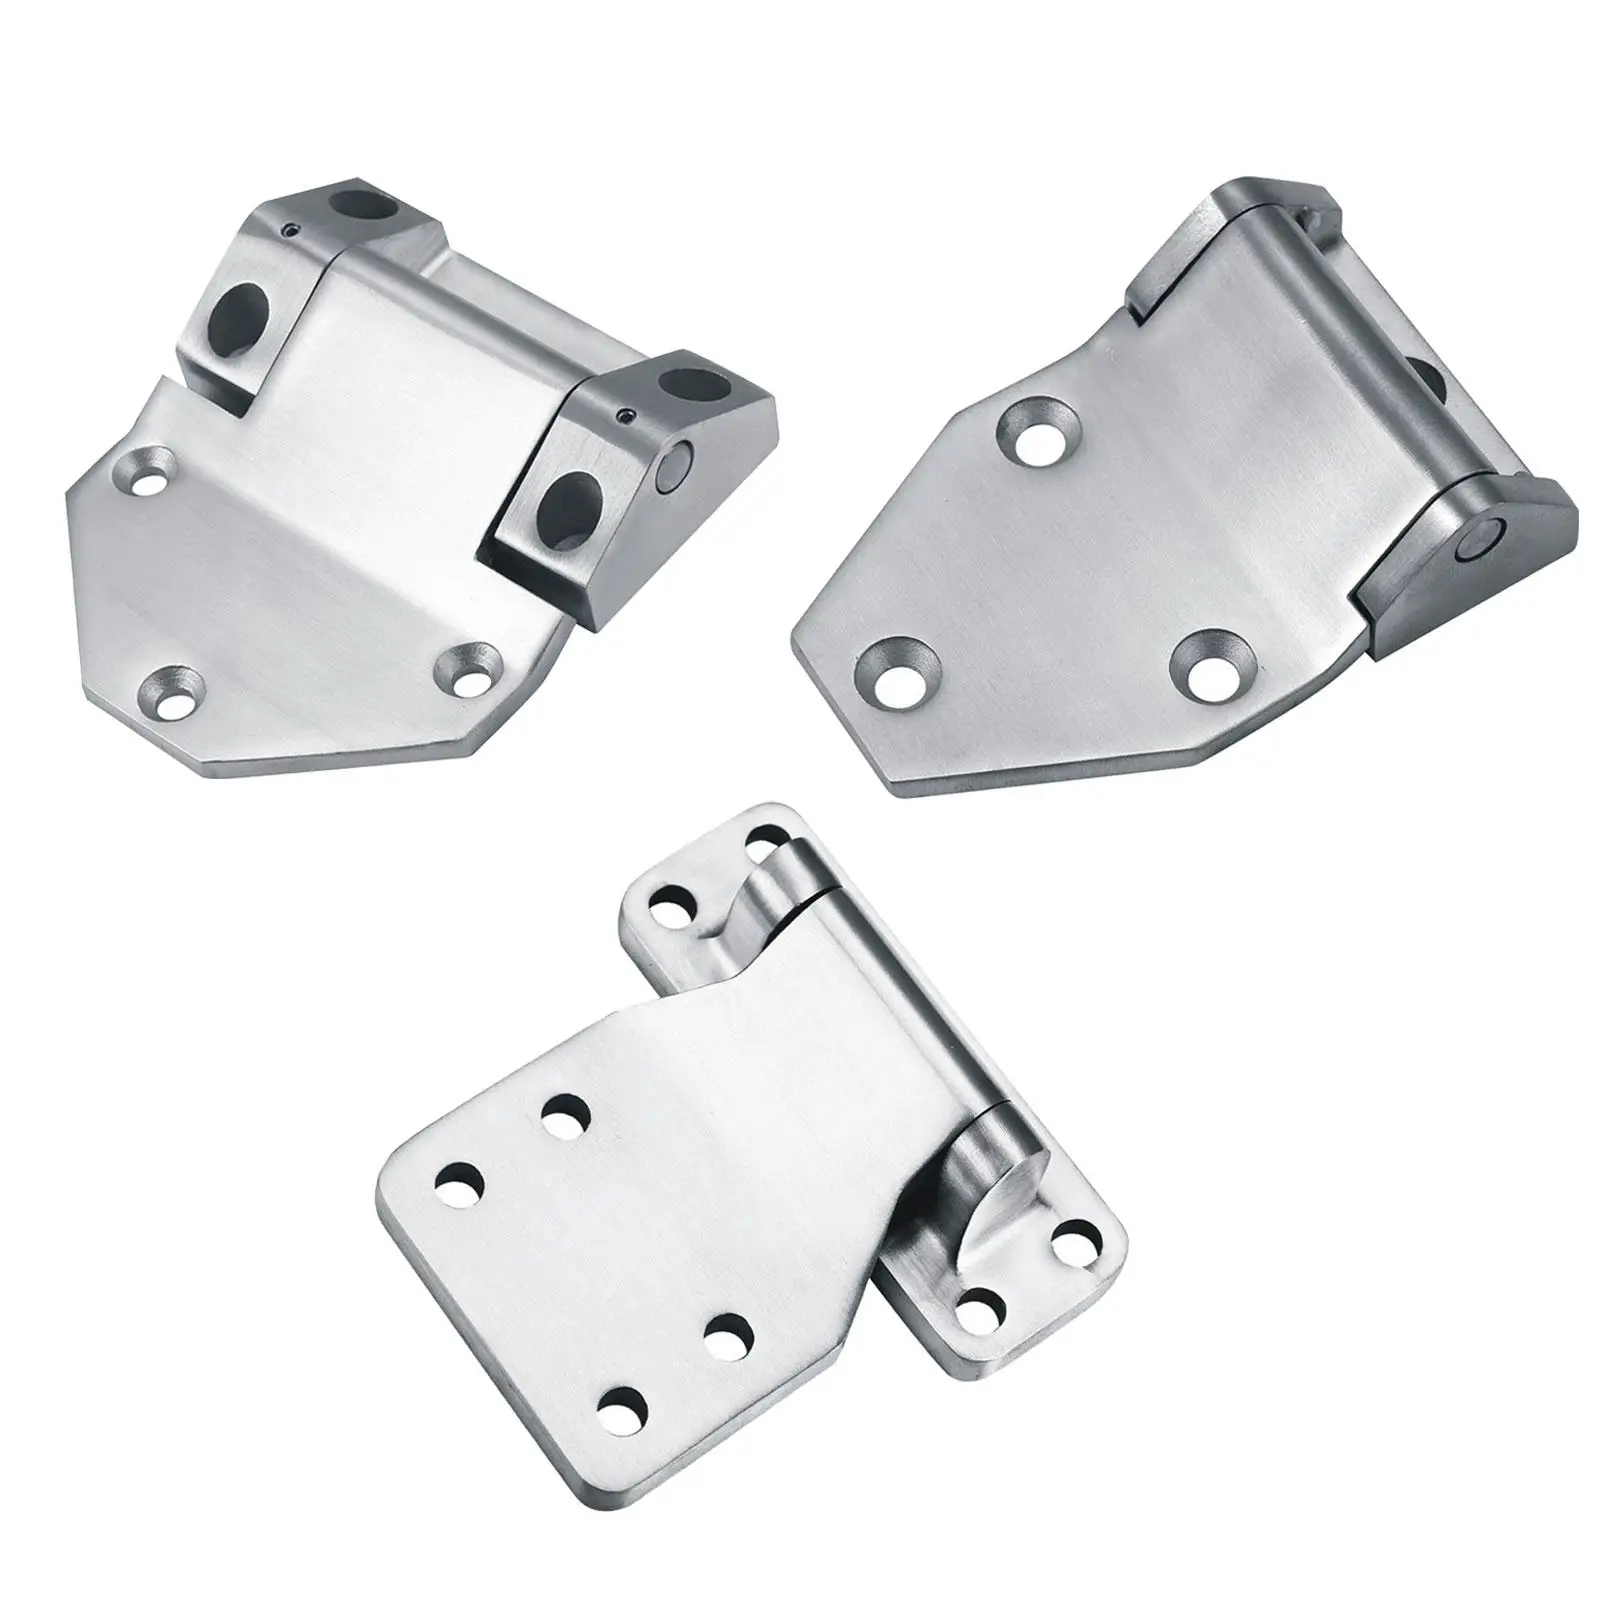 304 Stainless Steel Door Hinges Hardware Barn Hinges Replacement Parts Door Fittings for Gate Kitchen Wardrobe Rvs Furniture